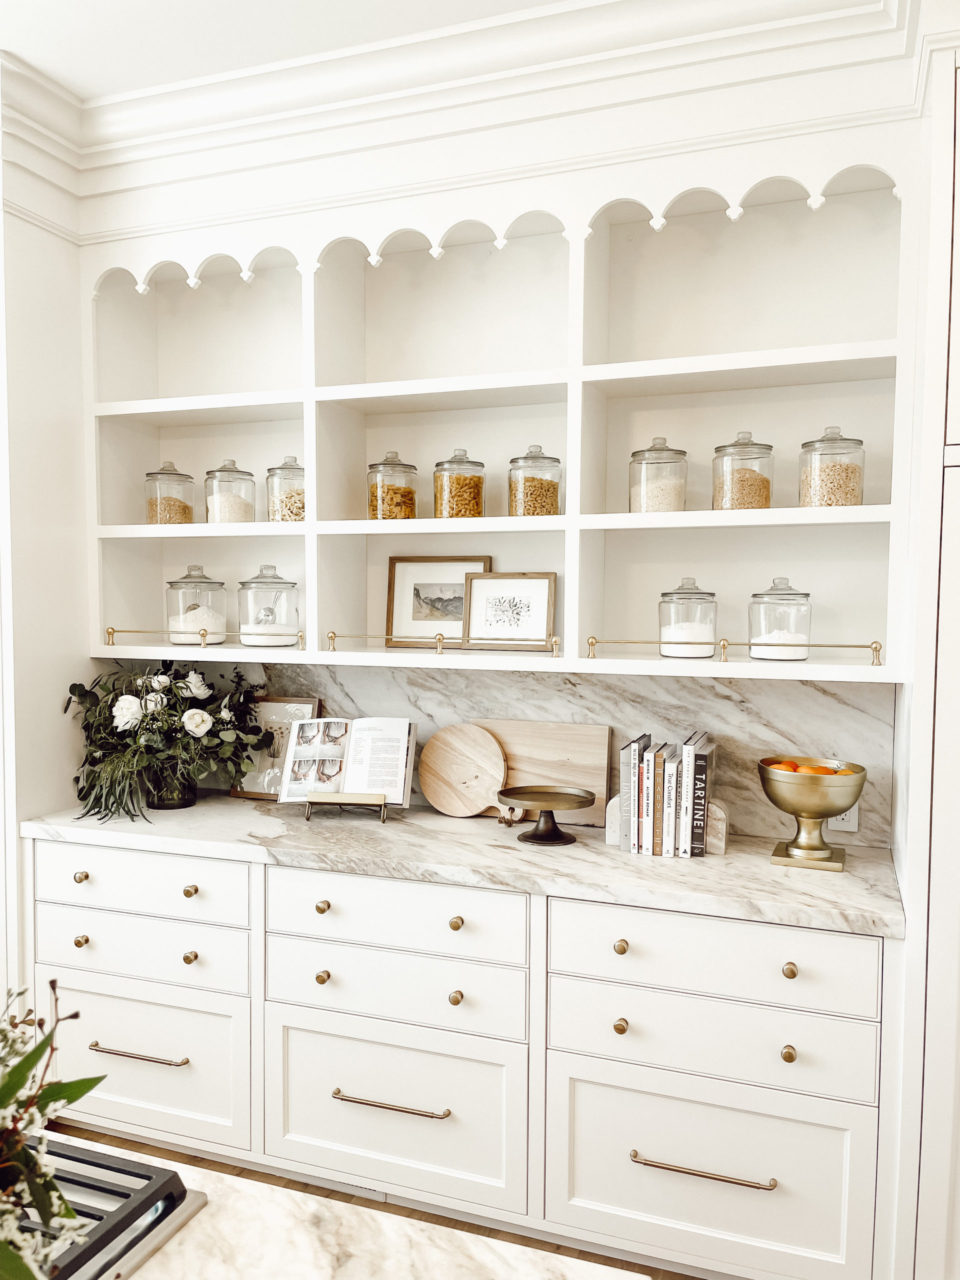 pantry with glass jars, white cabinets and gold hardware. intricate molding detail